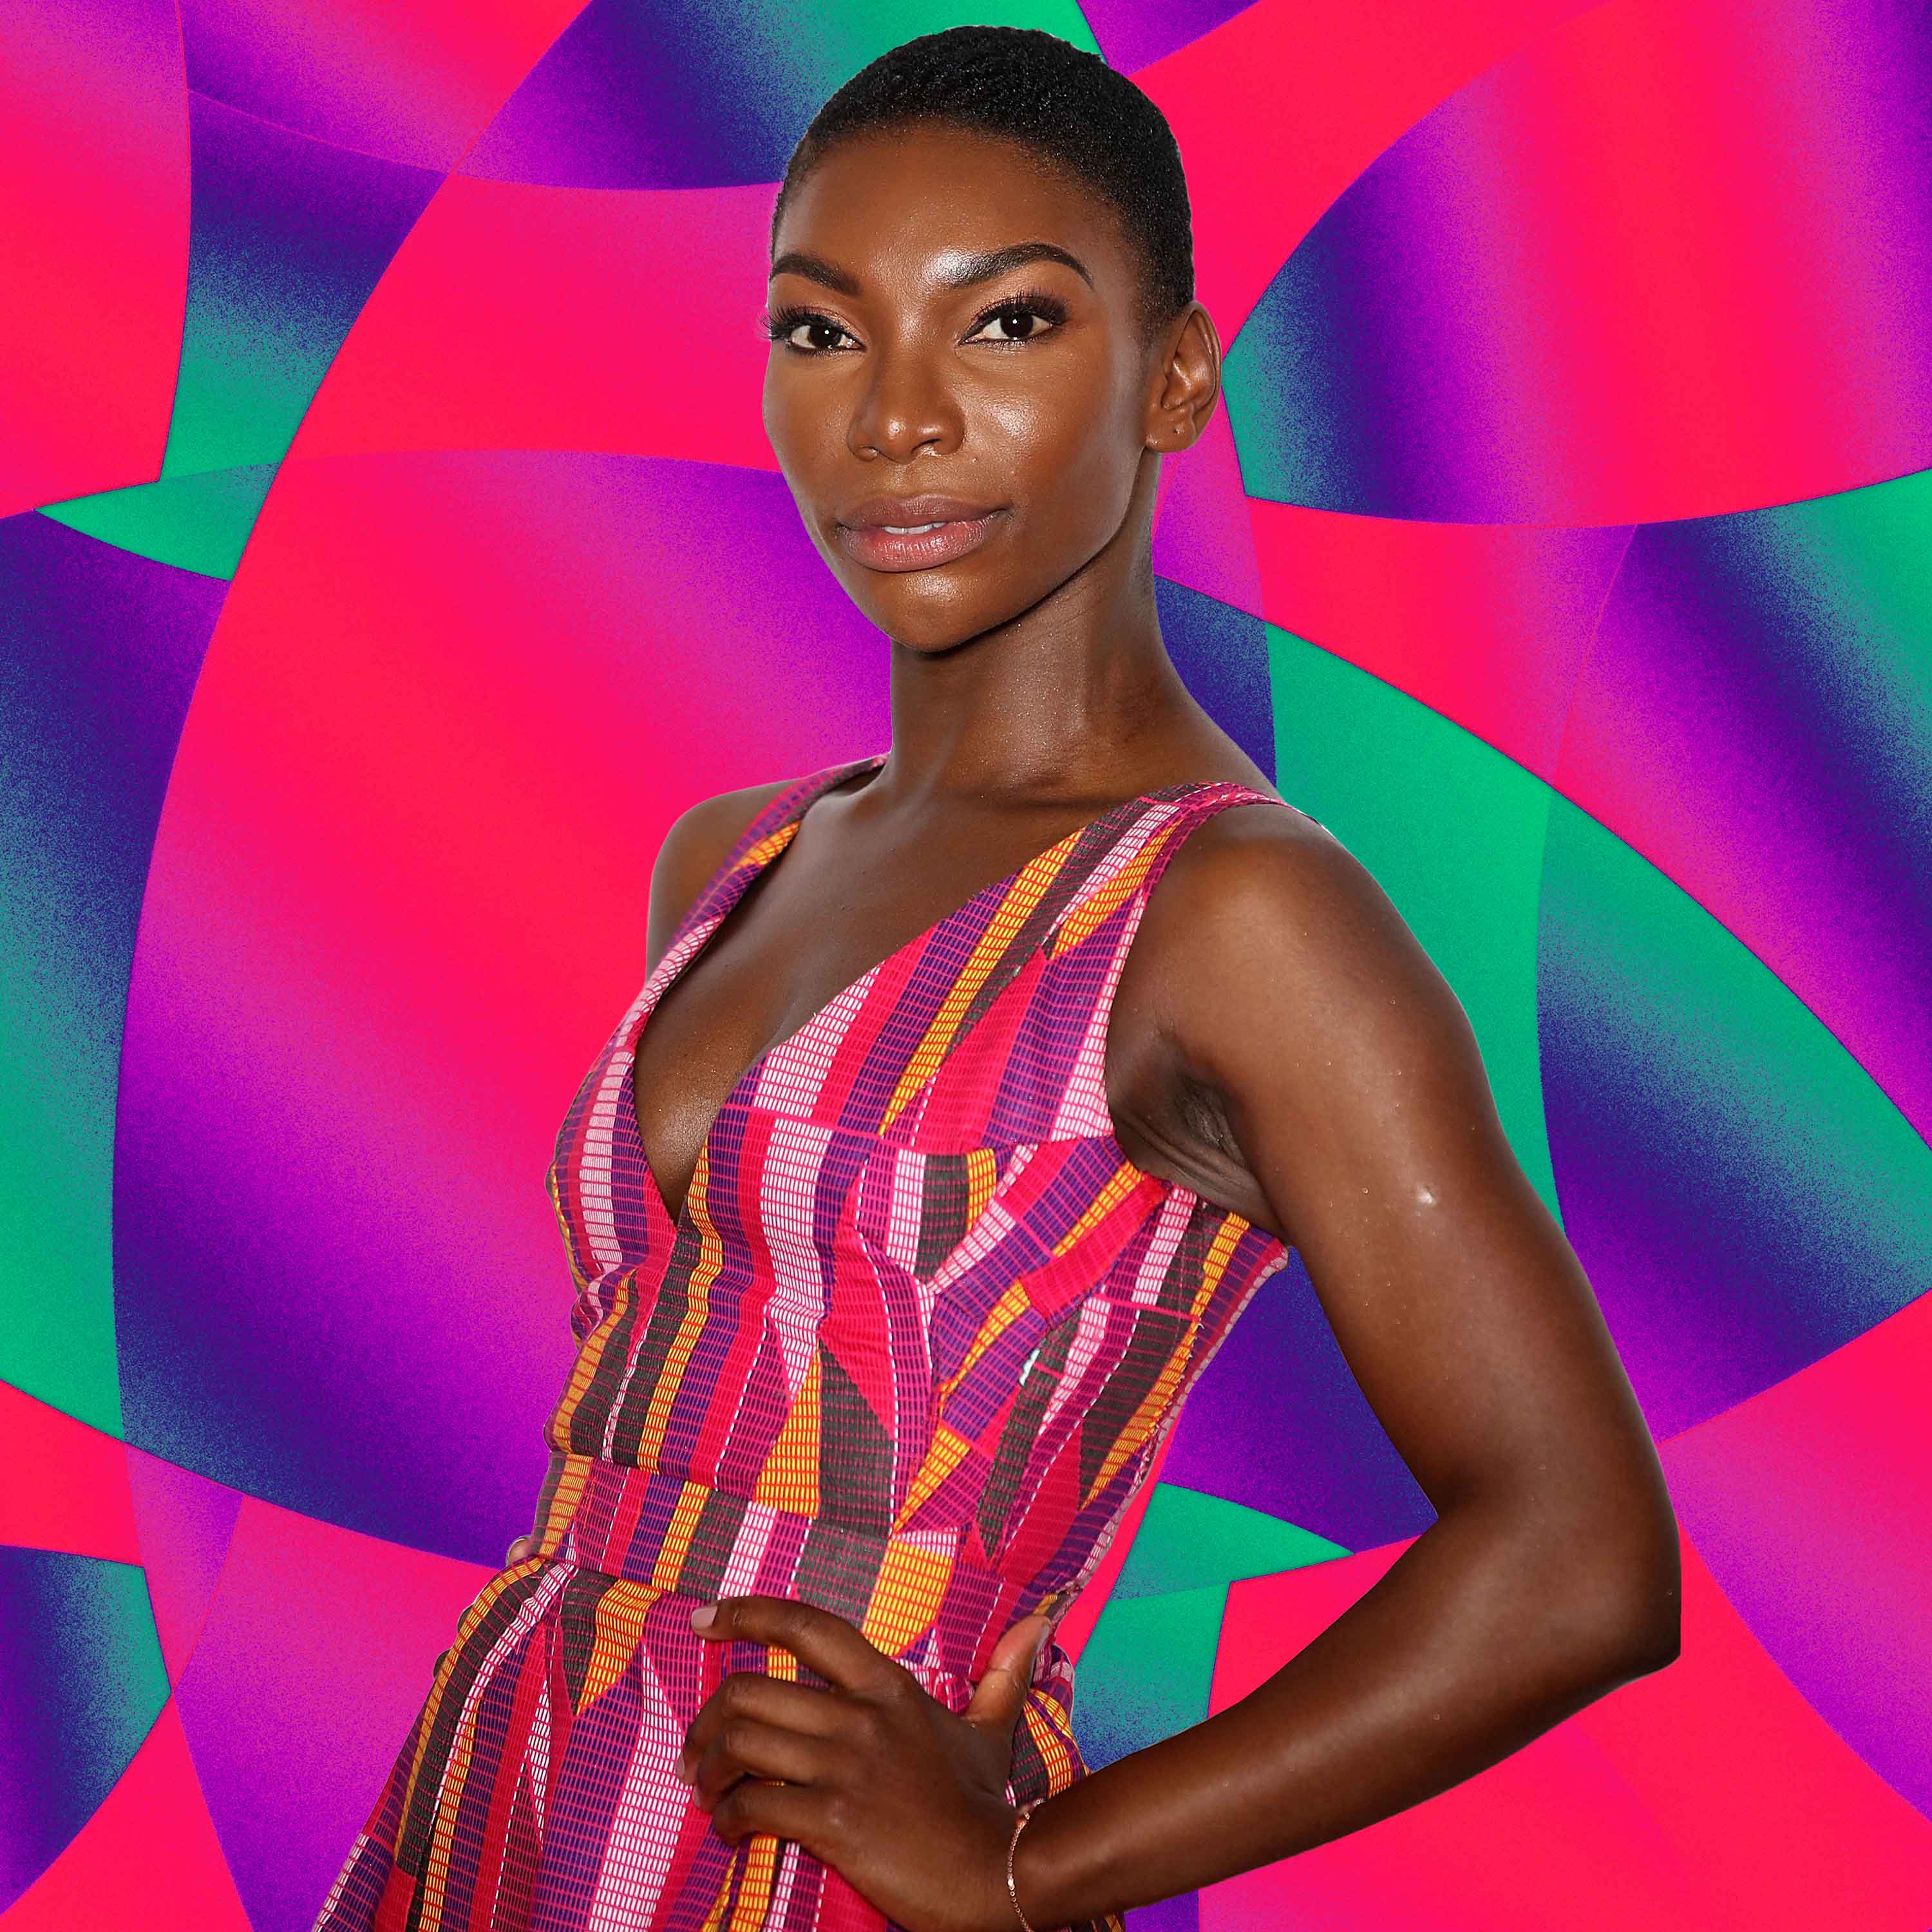 ‘Chewing Gum’ Star Michaela Coel Has Her Mom to Thank for Stunning BAFTA Look